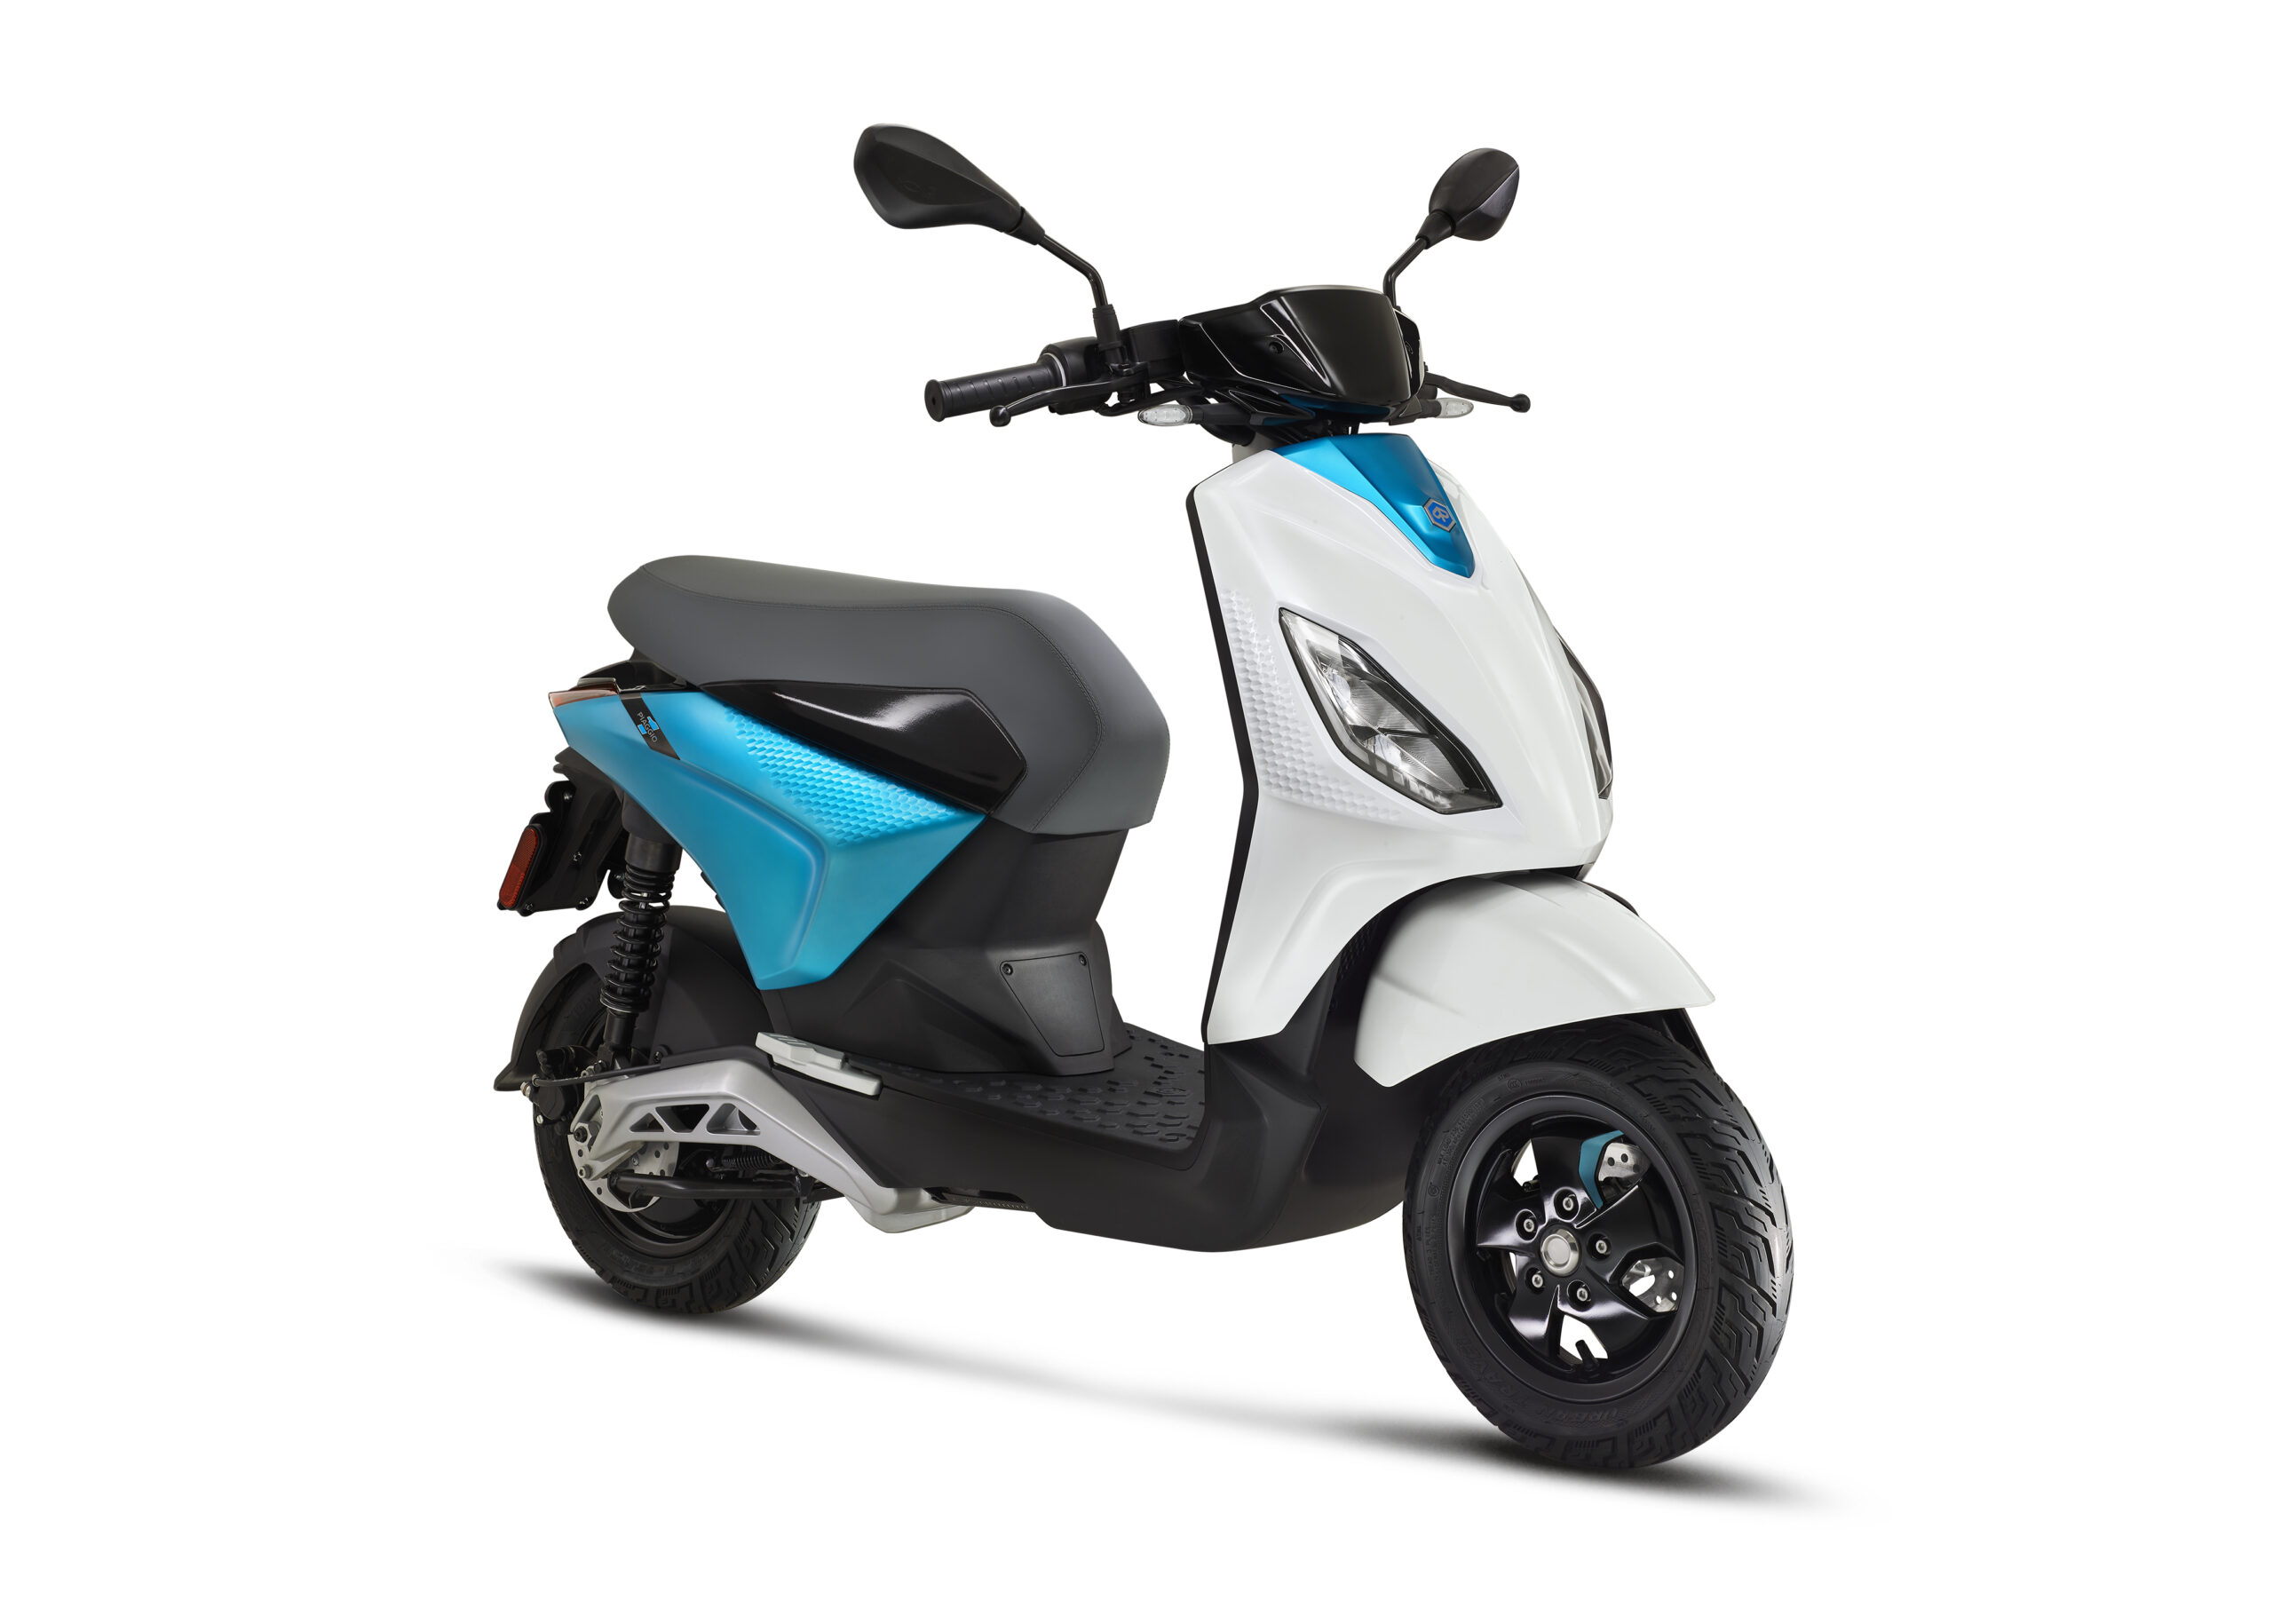 PIAGGIO LYBERTY 125 iGET ABS